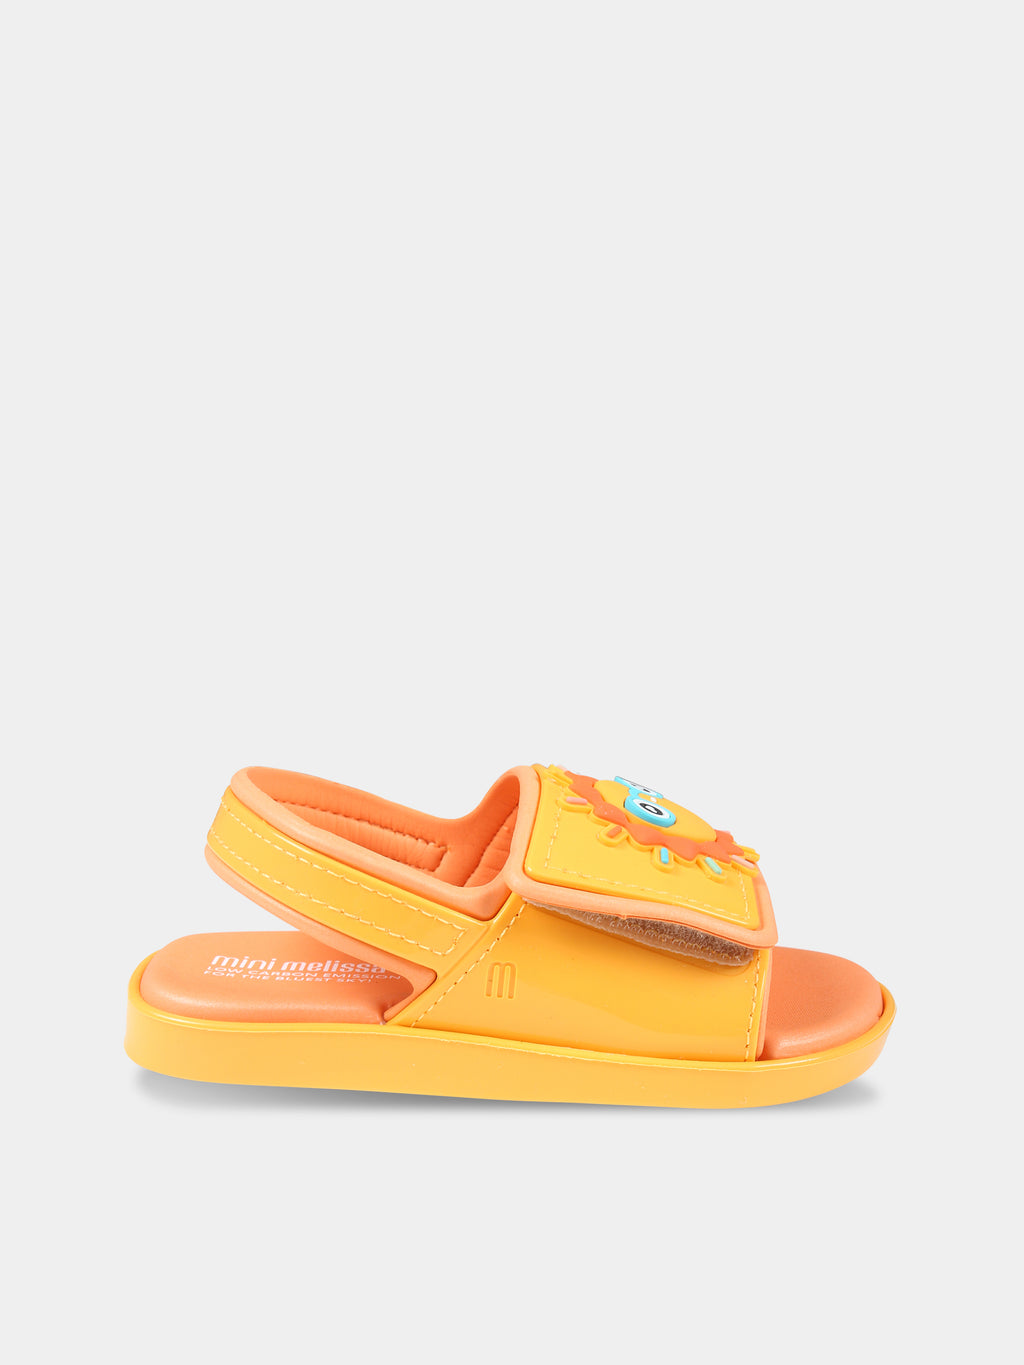 Orange sandals for kids with sun and cloud